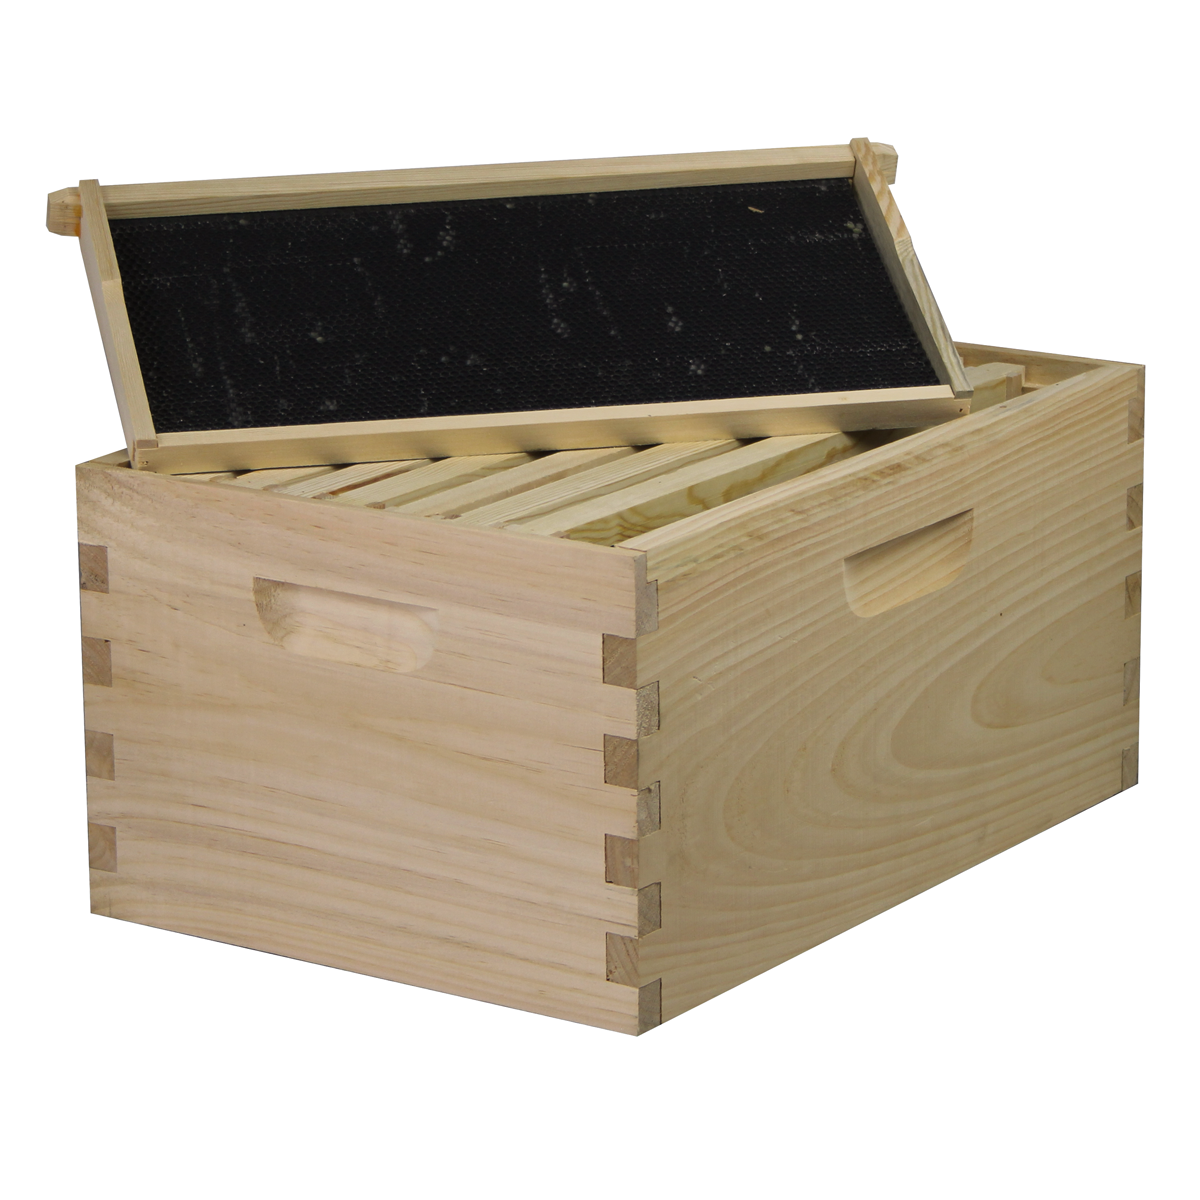 Busy Bees 'N' More Amish Made 8 Frame Deep Brood Box With Frames & Foundations